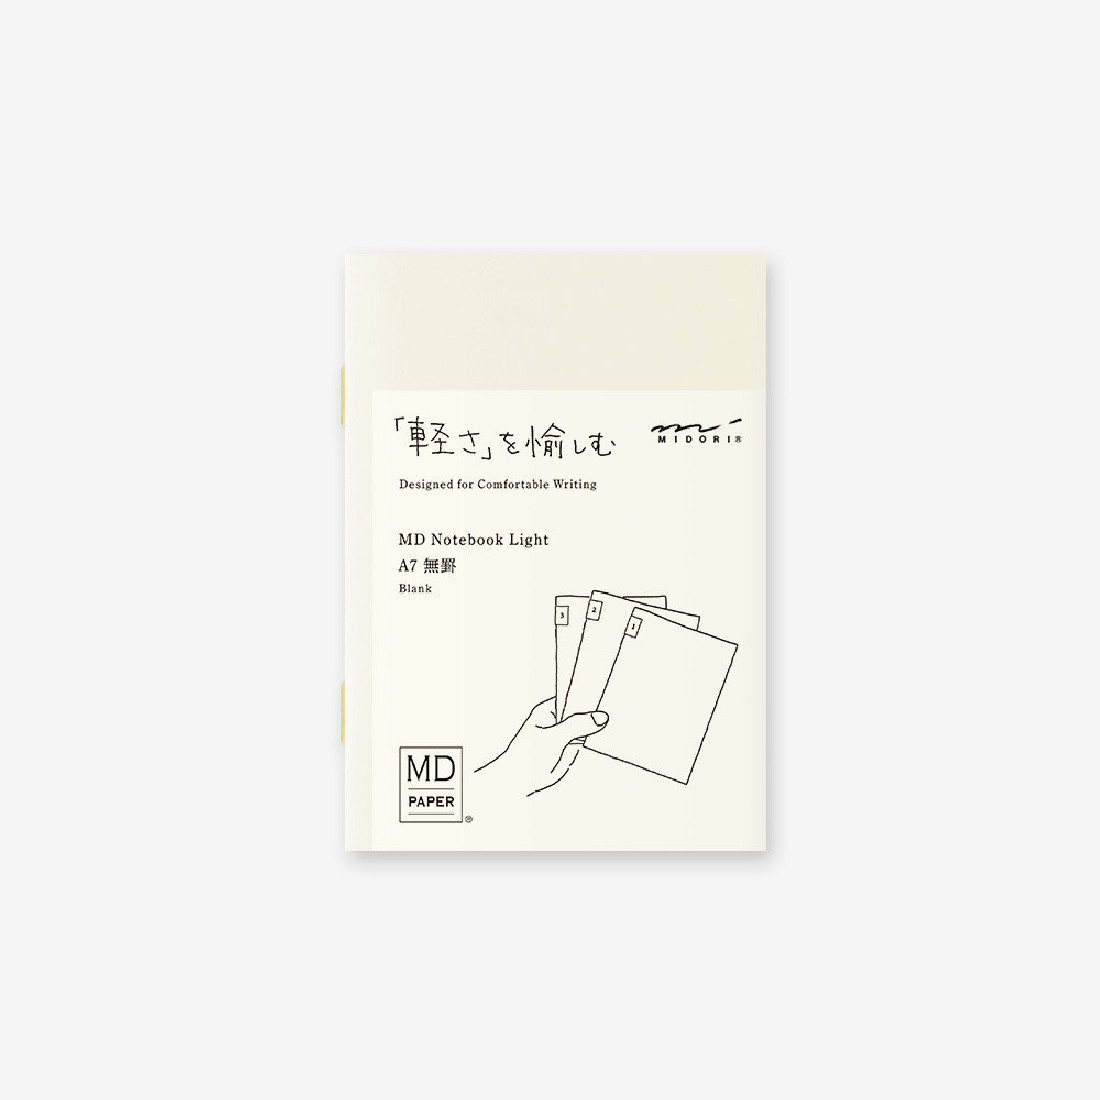 Midori MD Notebook Light A7 105x74mm, Blank, 3pcs pack, Label stickers, Saddle Stitched, 48 pages each, 15281006